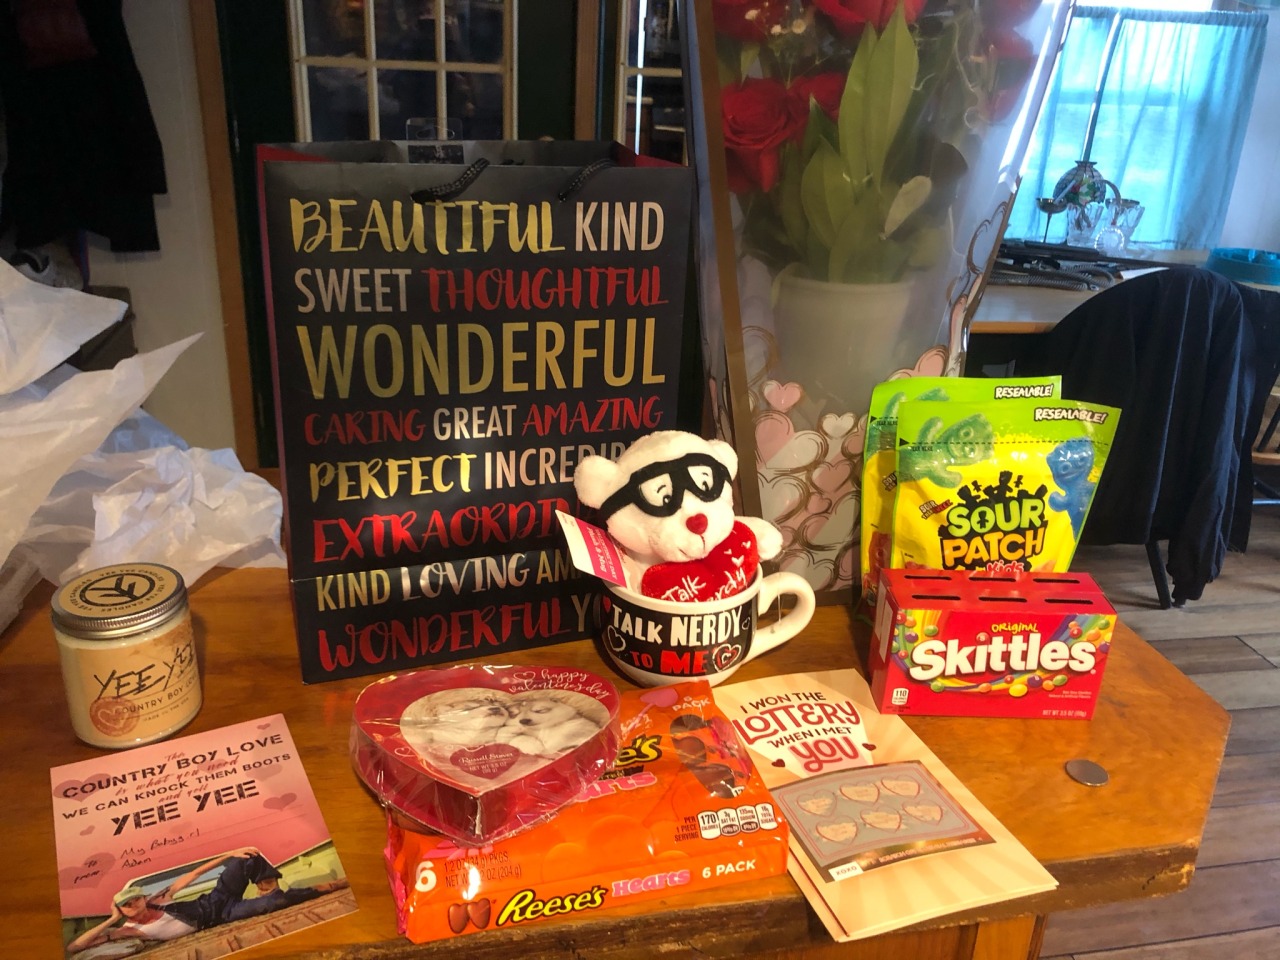 She was a smartass about it but, she told me she loved her Valentine’s Day stuff.